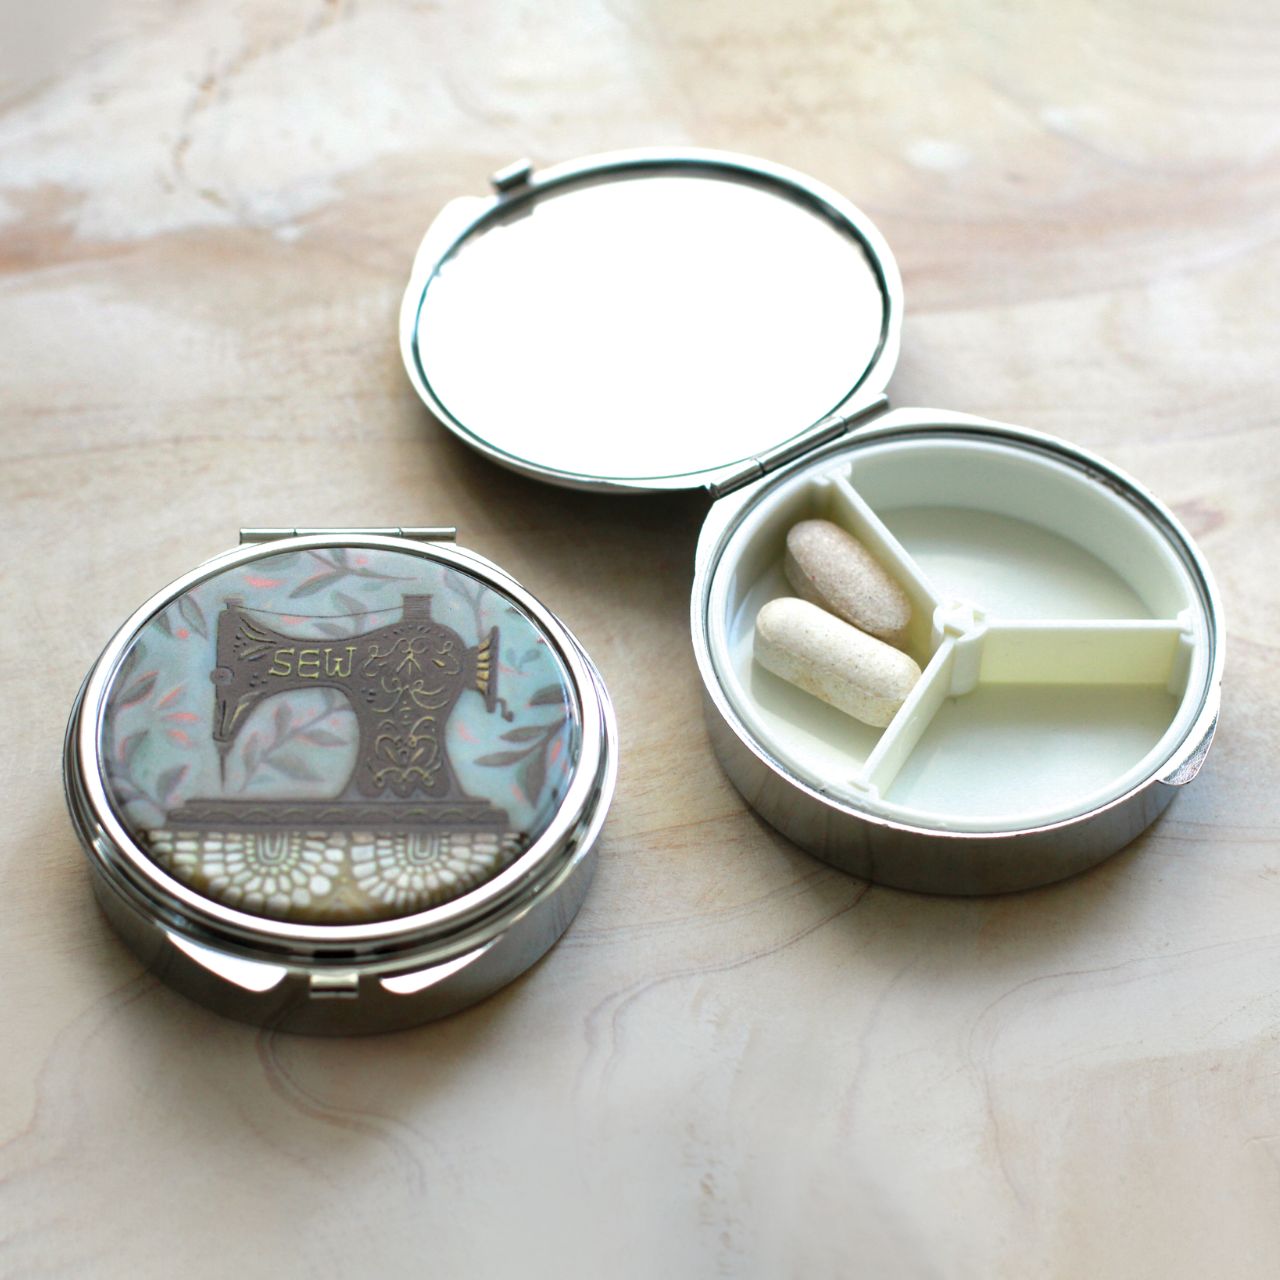 Michelle Allen Vintage Stitch Trinket Box  This lightweight and durable Stitch trinket box makes a splendid gift for a friend or yourself. They are the perfect size to fit in any purse, make-up bag, carry on, or backpack. And best of all, they are super practical for every day use.